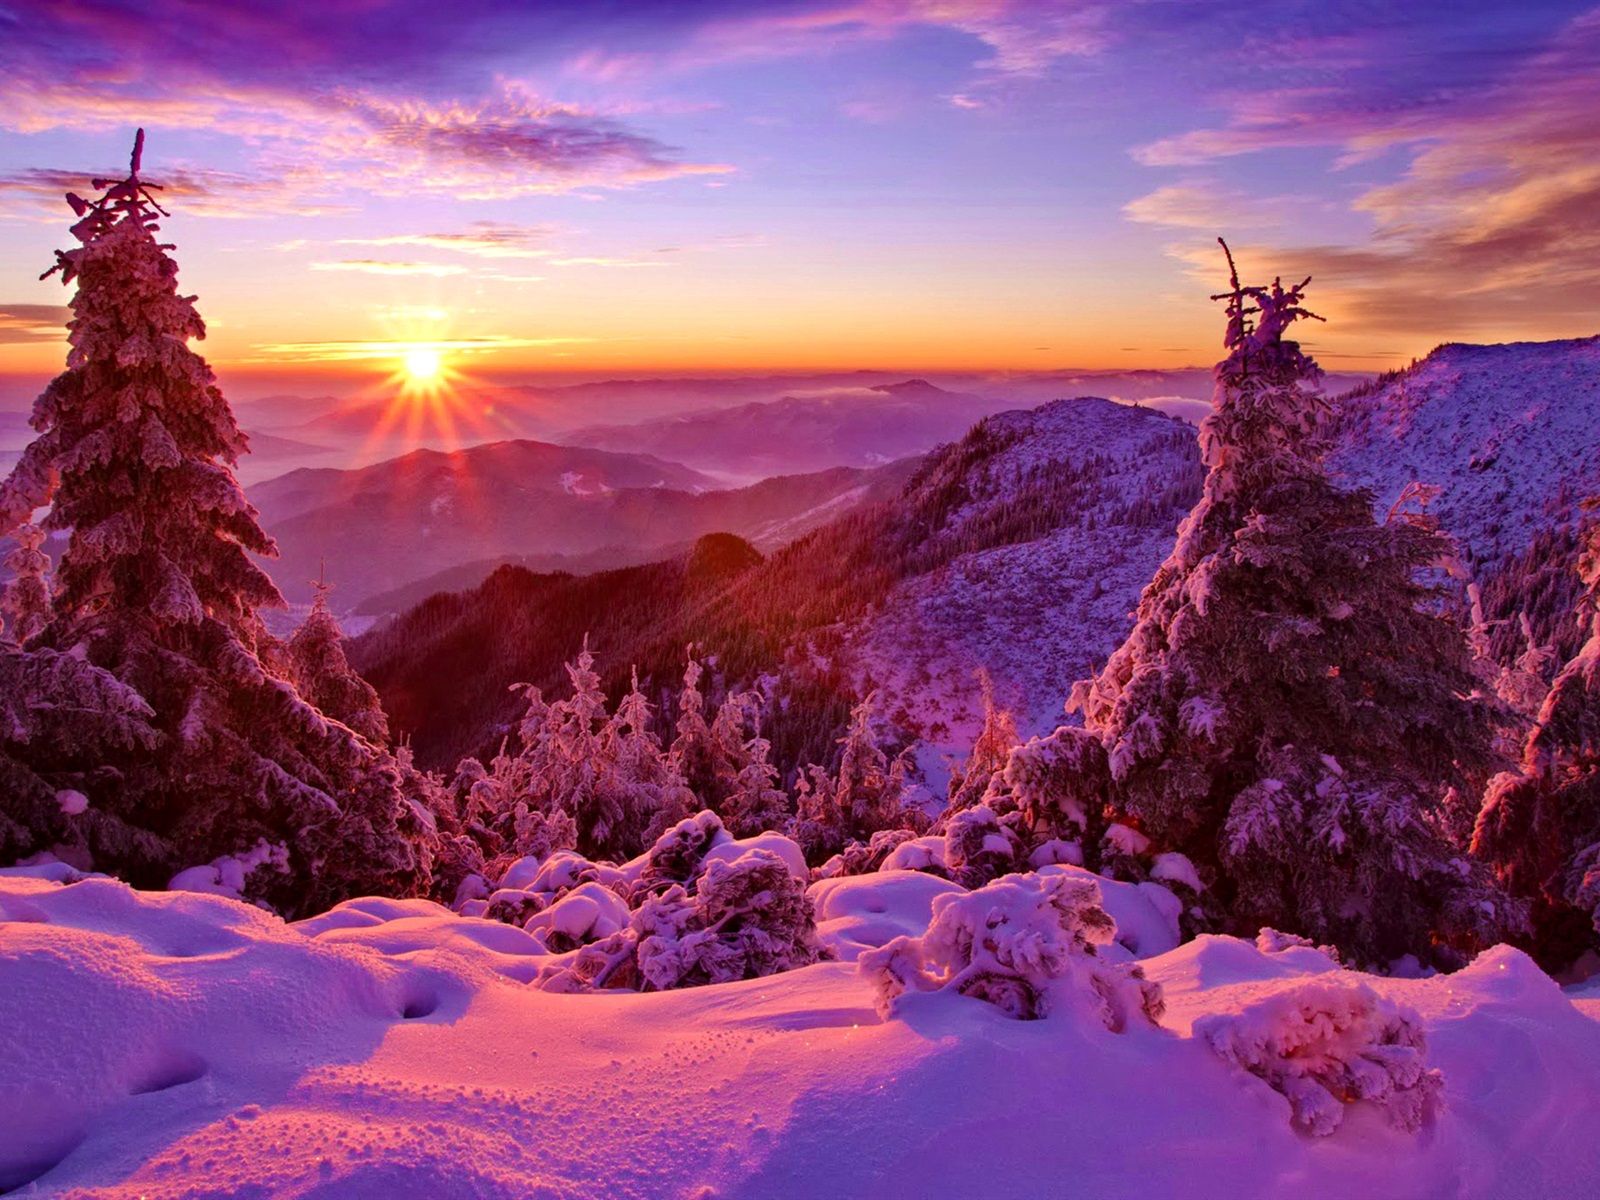 Winter, Sky, Sunset, Mountains, Forest, Trees, Spruce, Snow 640x1136 IPhone 5 5S 5C SE Wallpaper, Background, Picture, Image